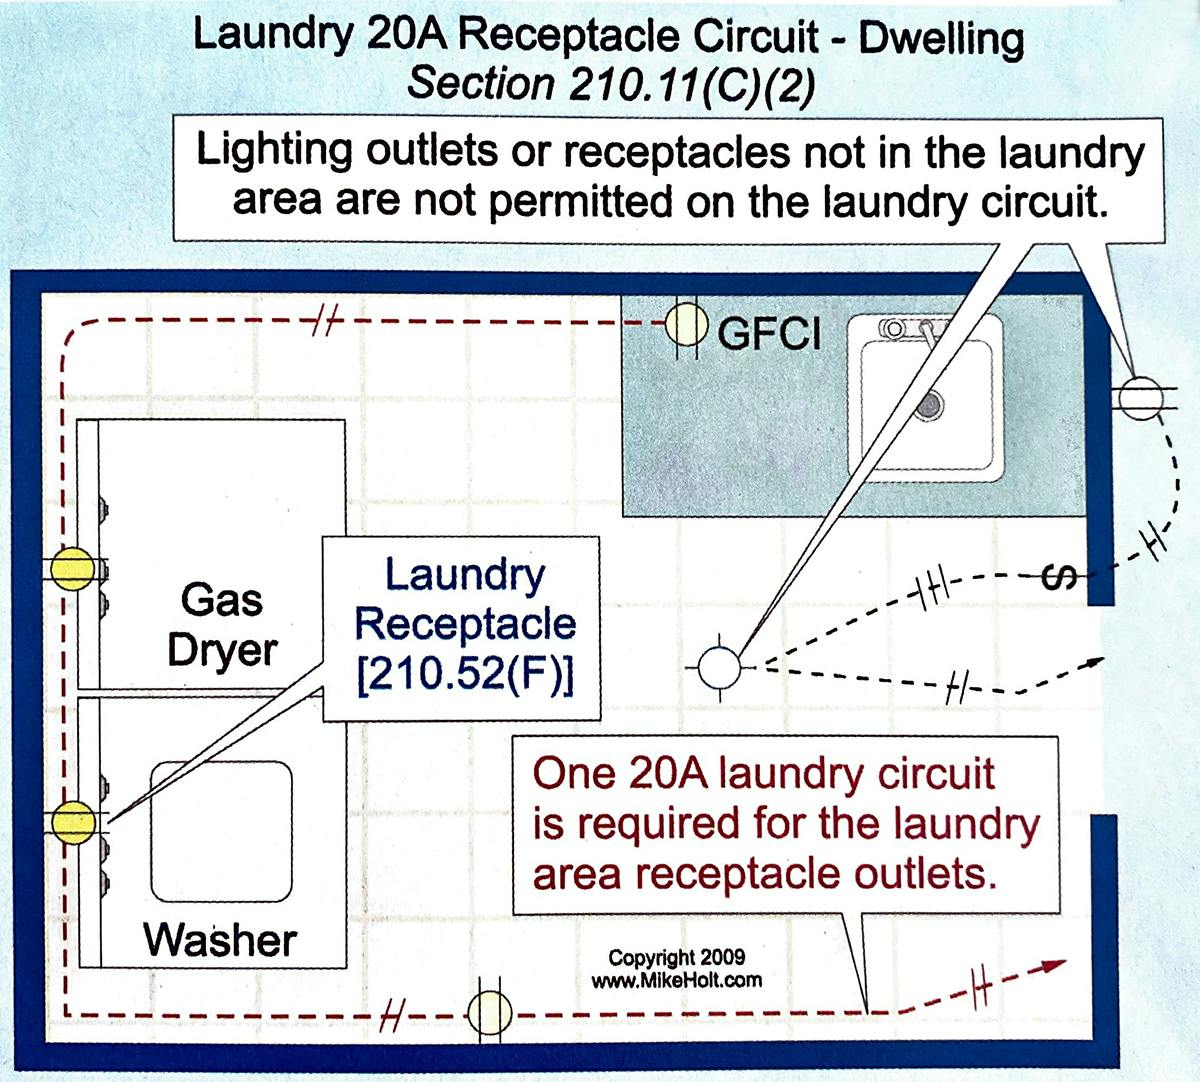 Fig. 2. Per Sec. 210.11(C)(2), one 20A, 120V branch circuit is required for the laundry area receptacles.